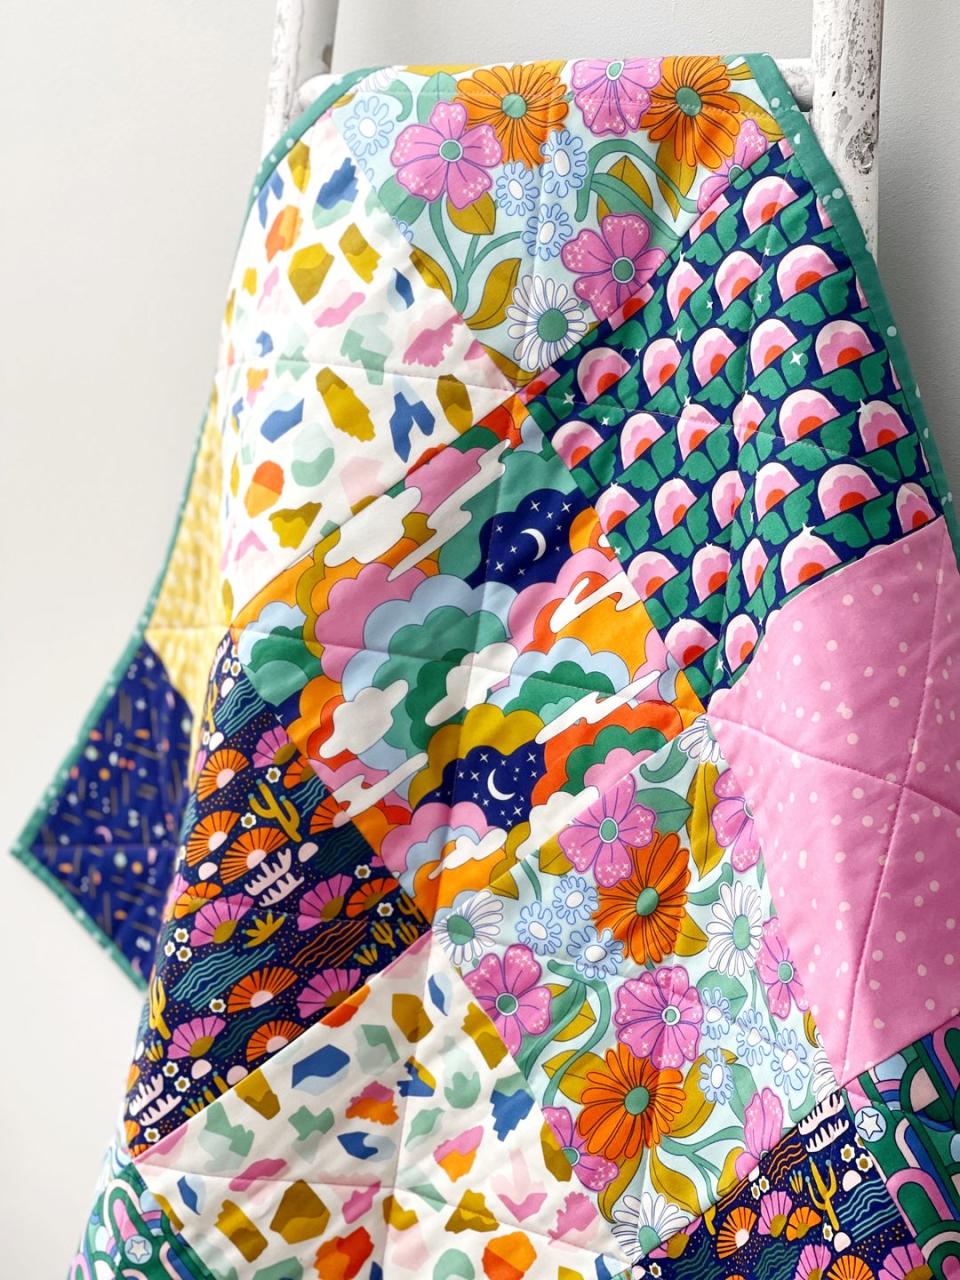 how to make a handmade quilt using patchwork, for beginners